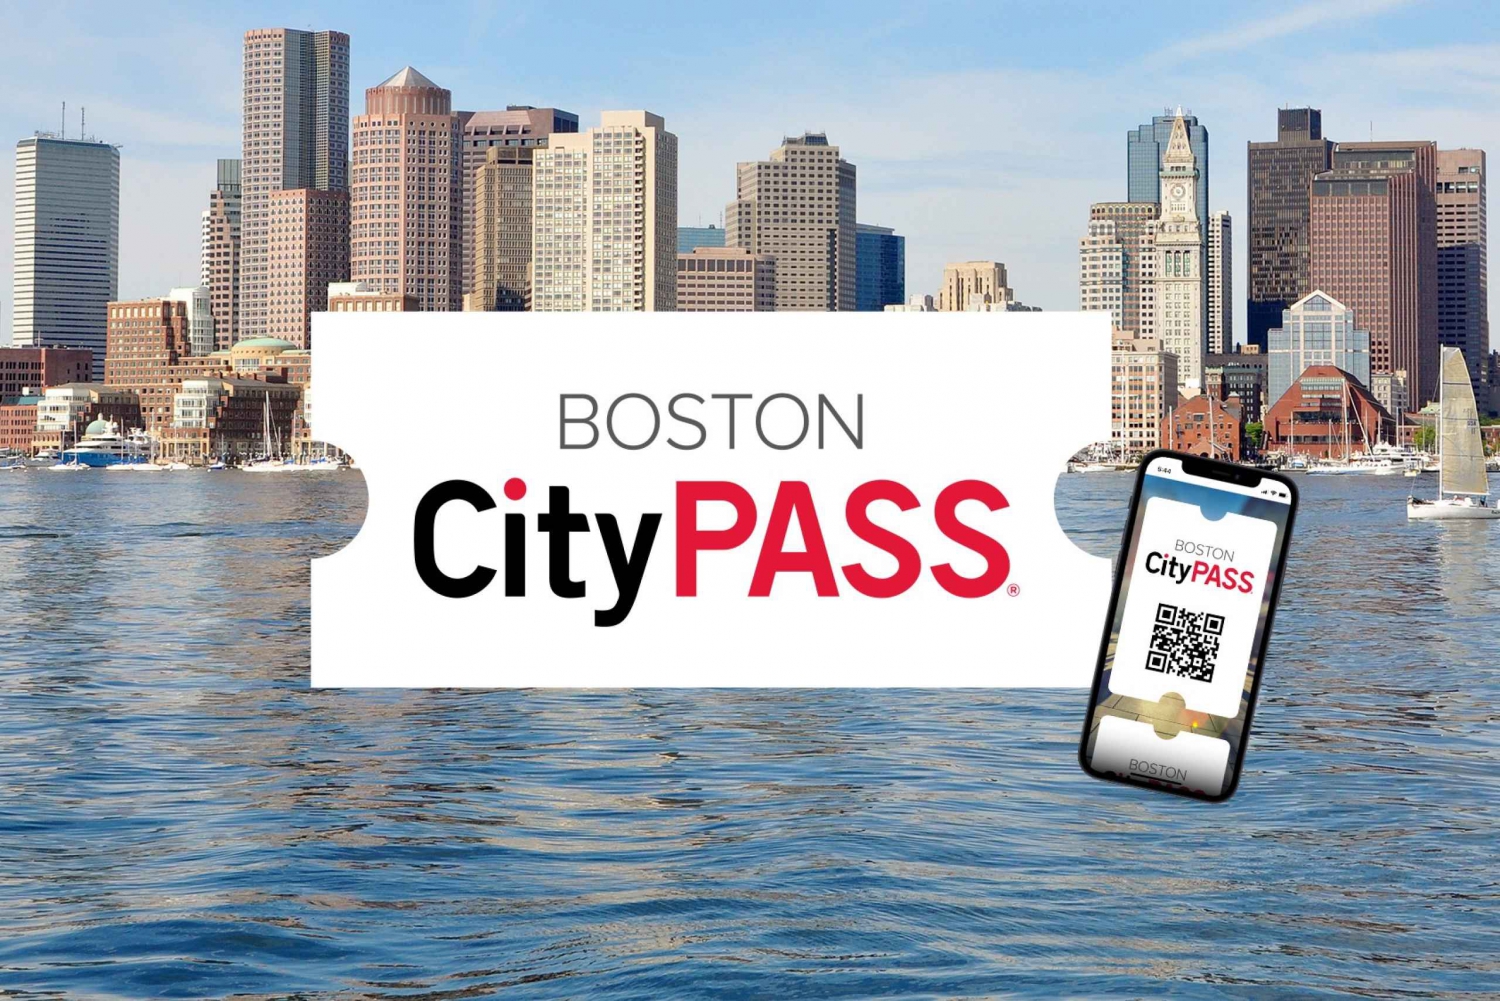 Boston CityPASS®: Save 45% at 4 Top Attractions